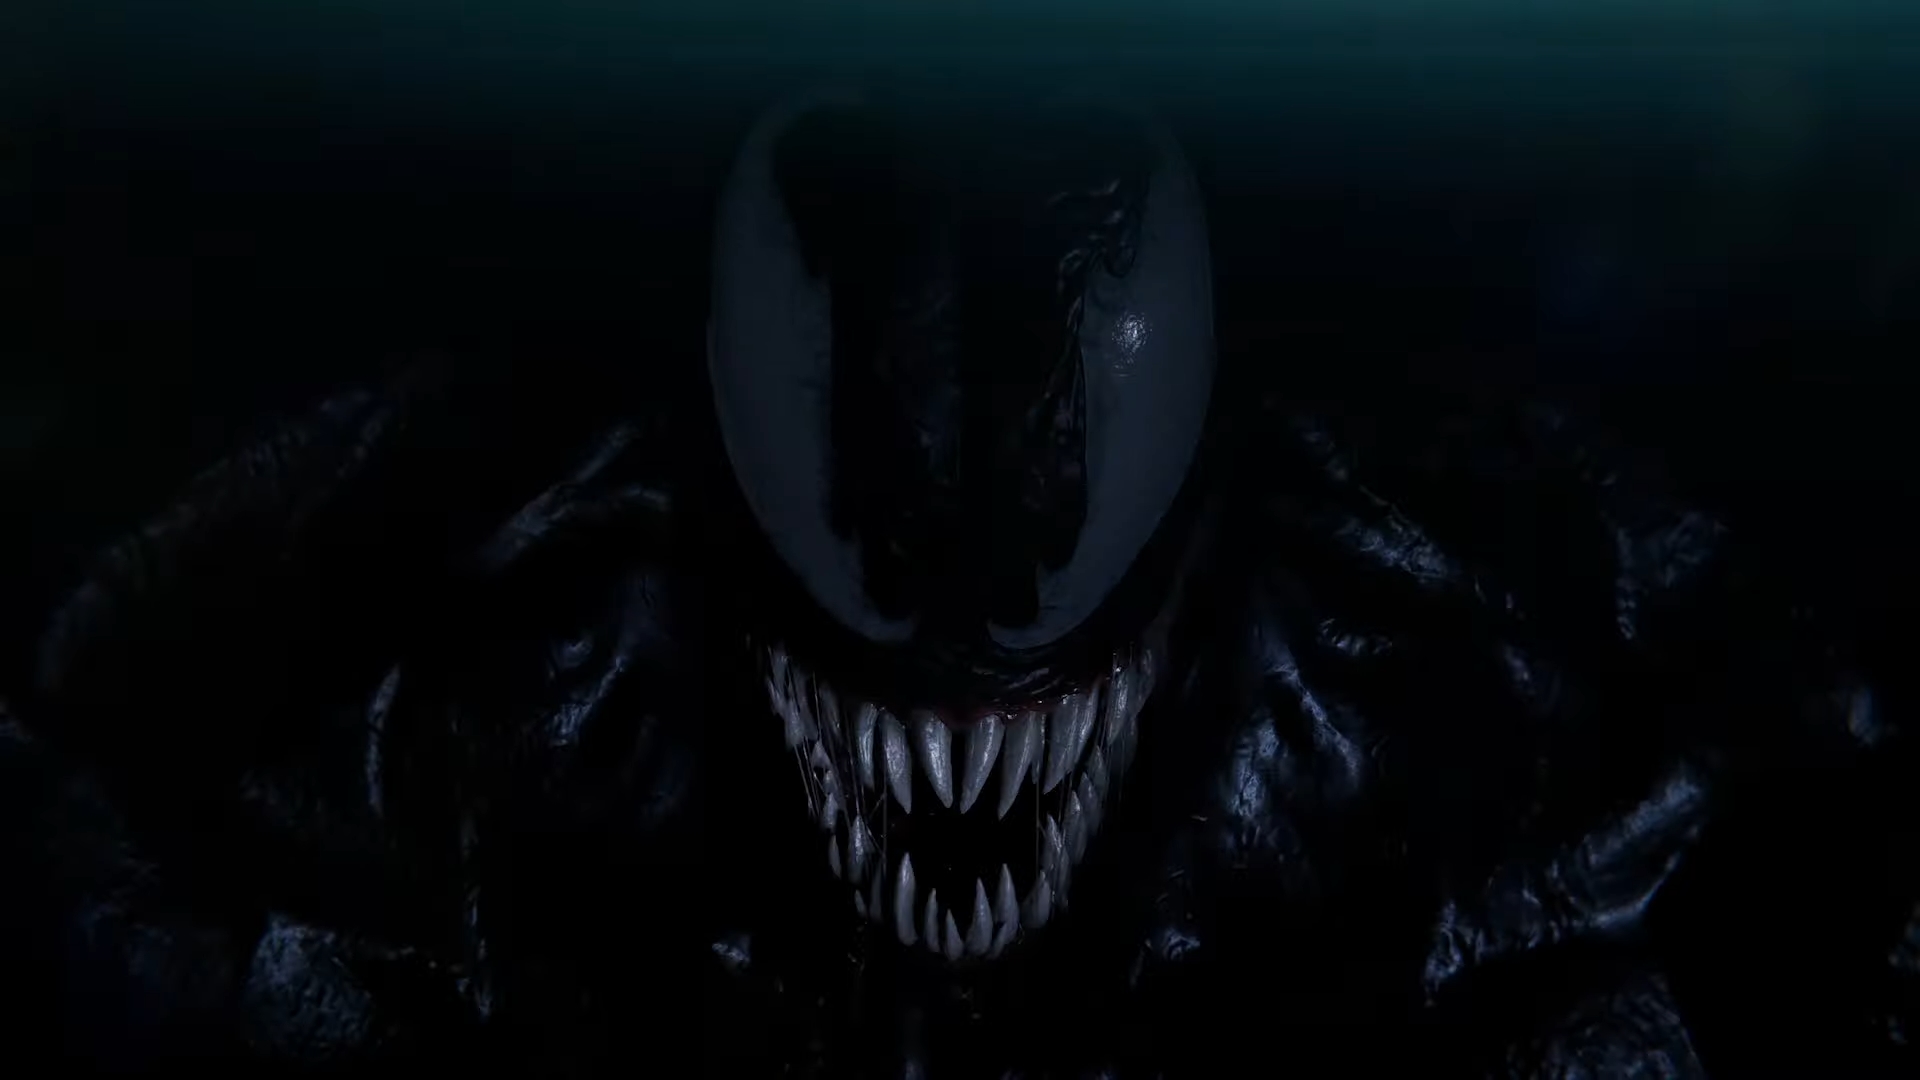 Screenshot from Marvel's Spider-Man 2 trailer showing a close-up of Venom